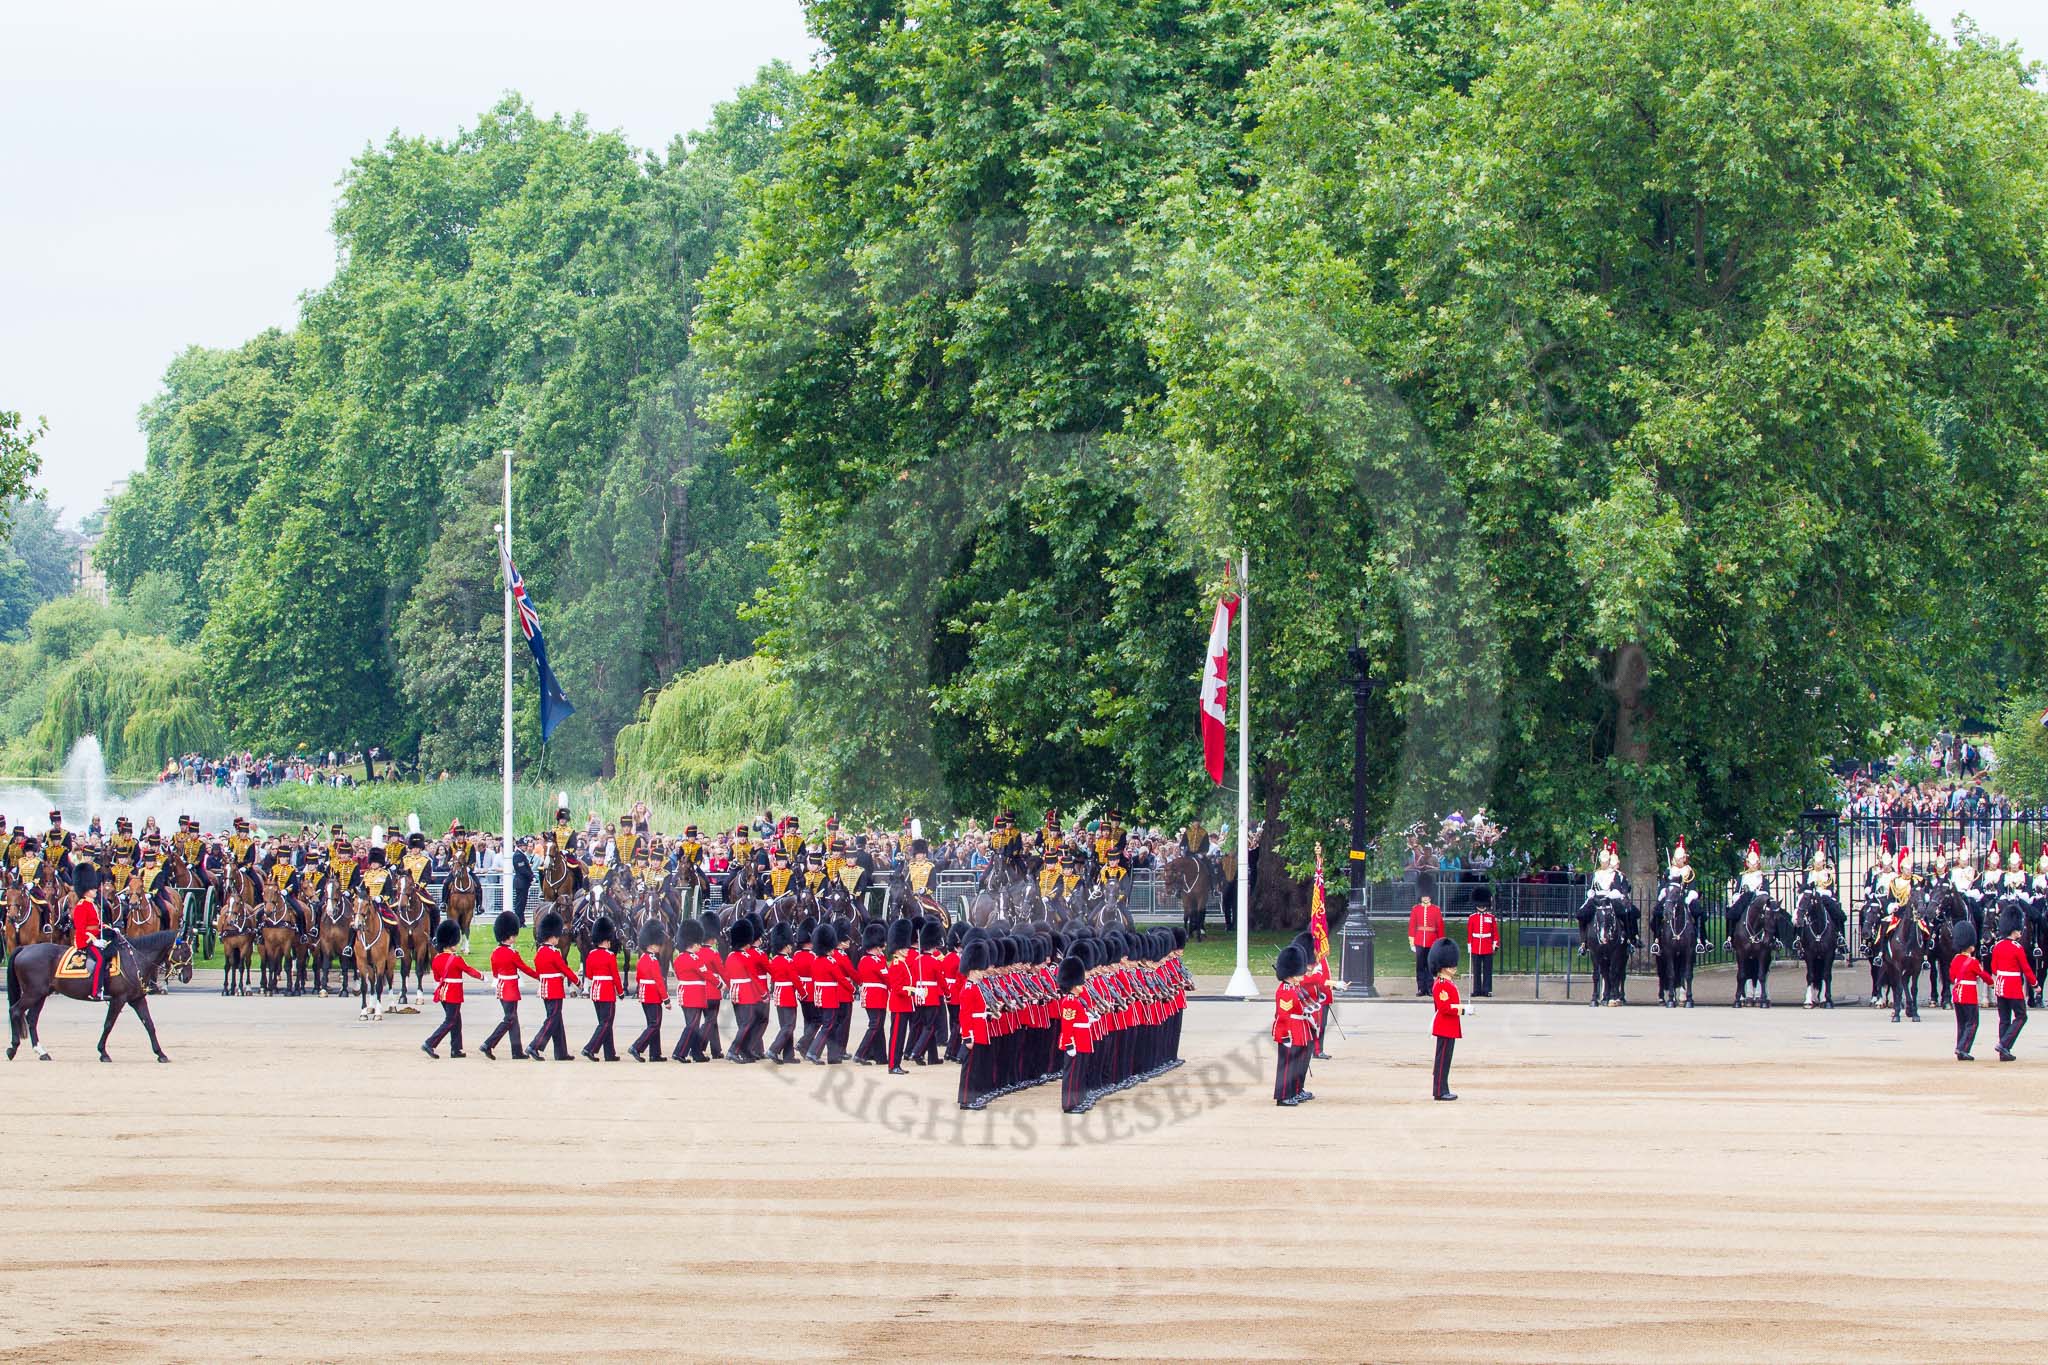 Trooping the Colour 2014.
Horse Guards Parade, Westminster,
London SW1A,

United Kingdom,
on 14 June 2014 at 11:31, image #582